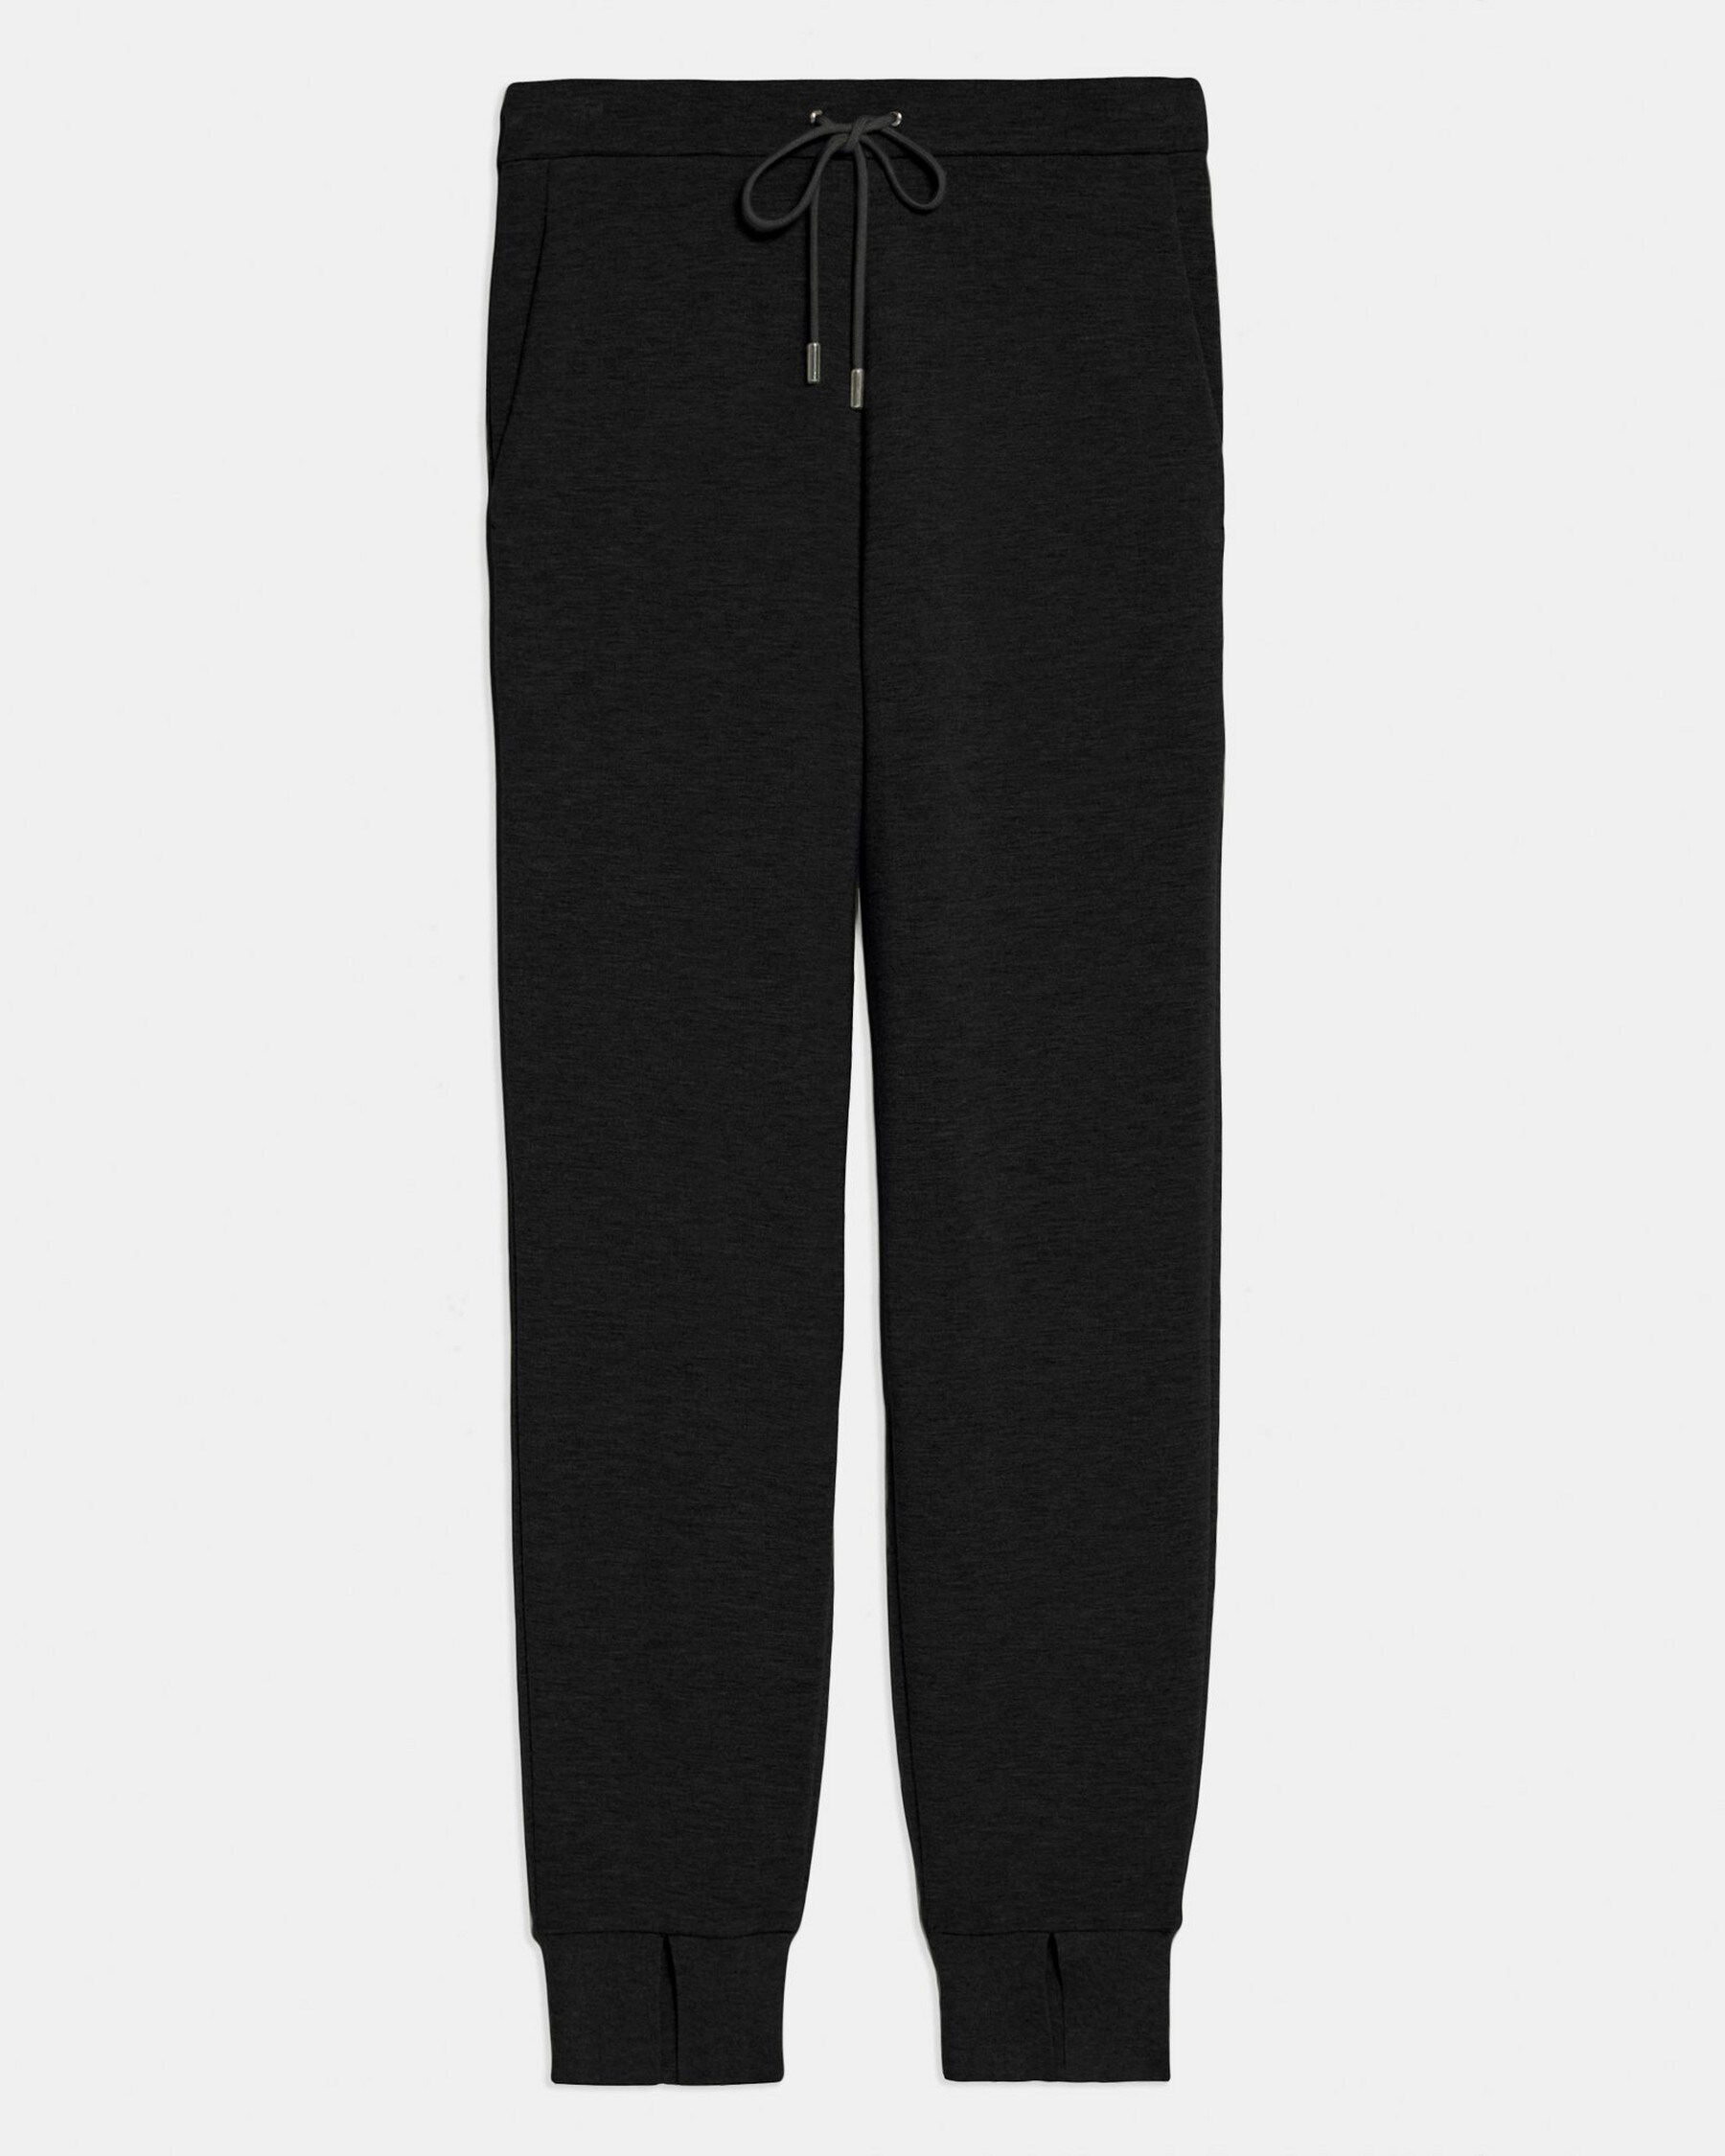 SLOUCHY JOGGER